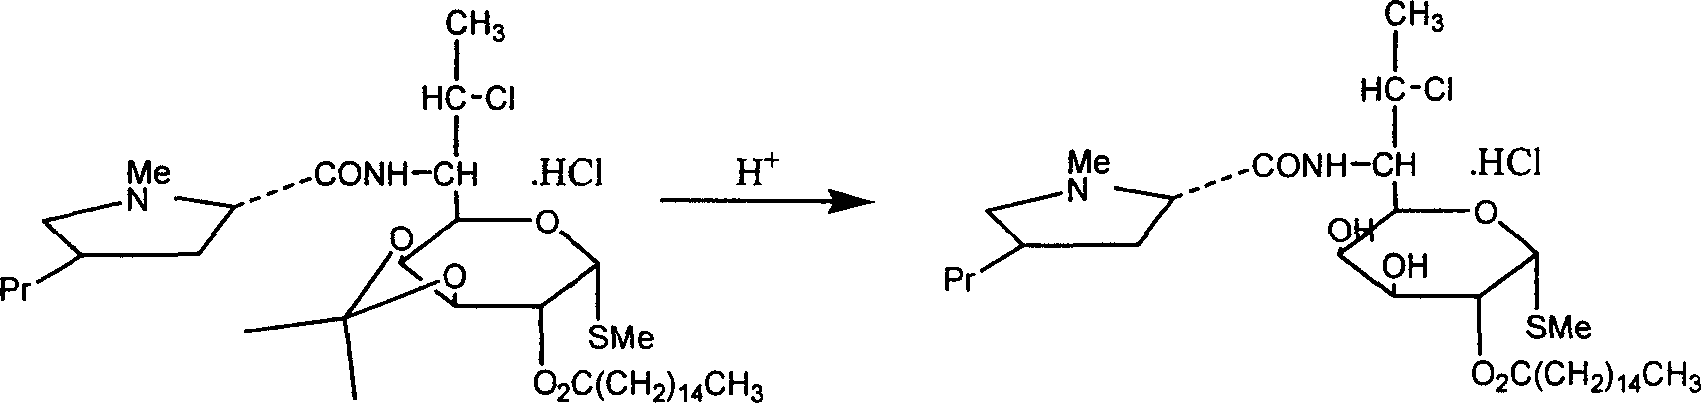 Industrial production process of palmitate of clindamycin hydrochloride